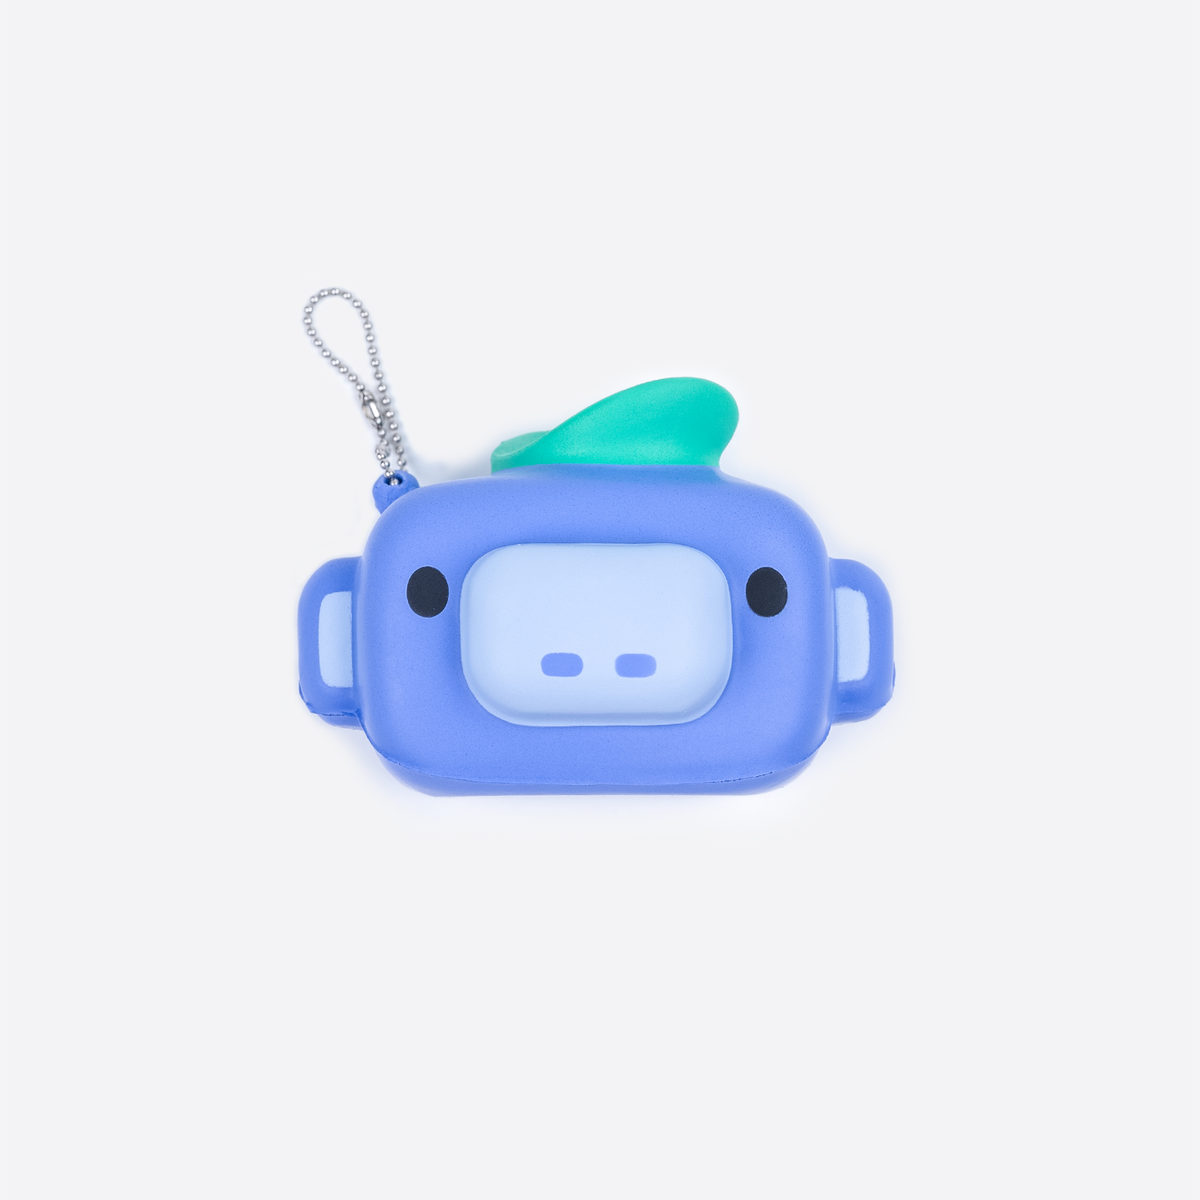 Wumpus Stream Deck – Discord Powered by DOTEXE